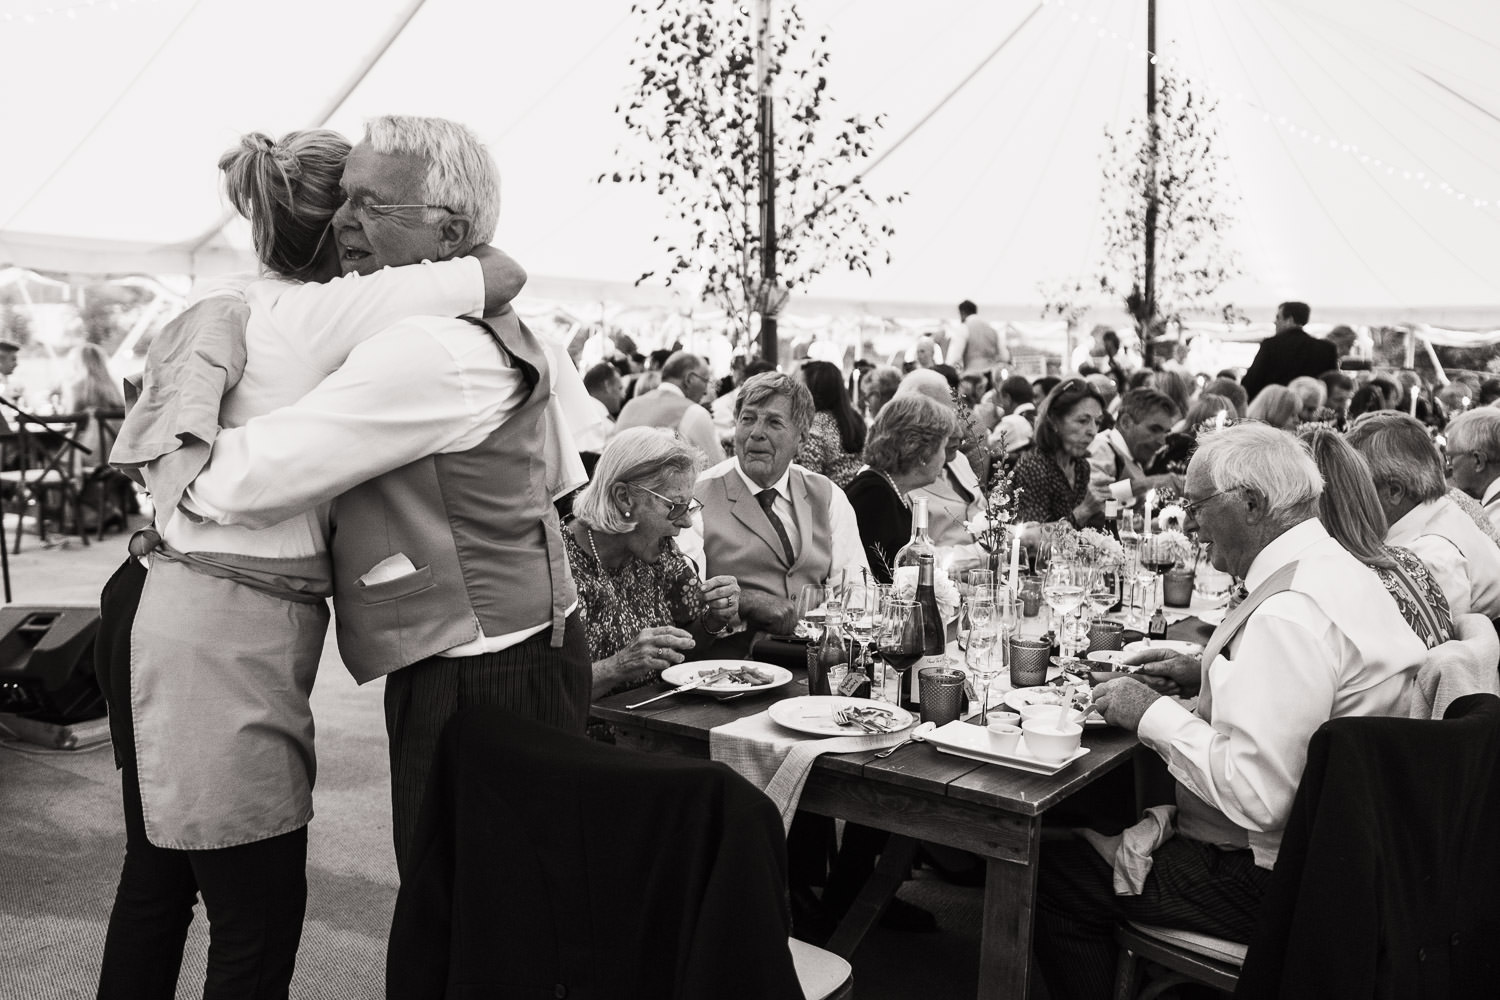 Member of the waiting staff from Anna Shutes hugs one of the guest during dinner.